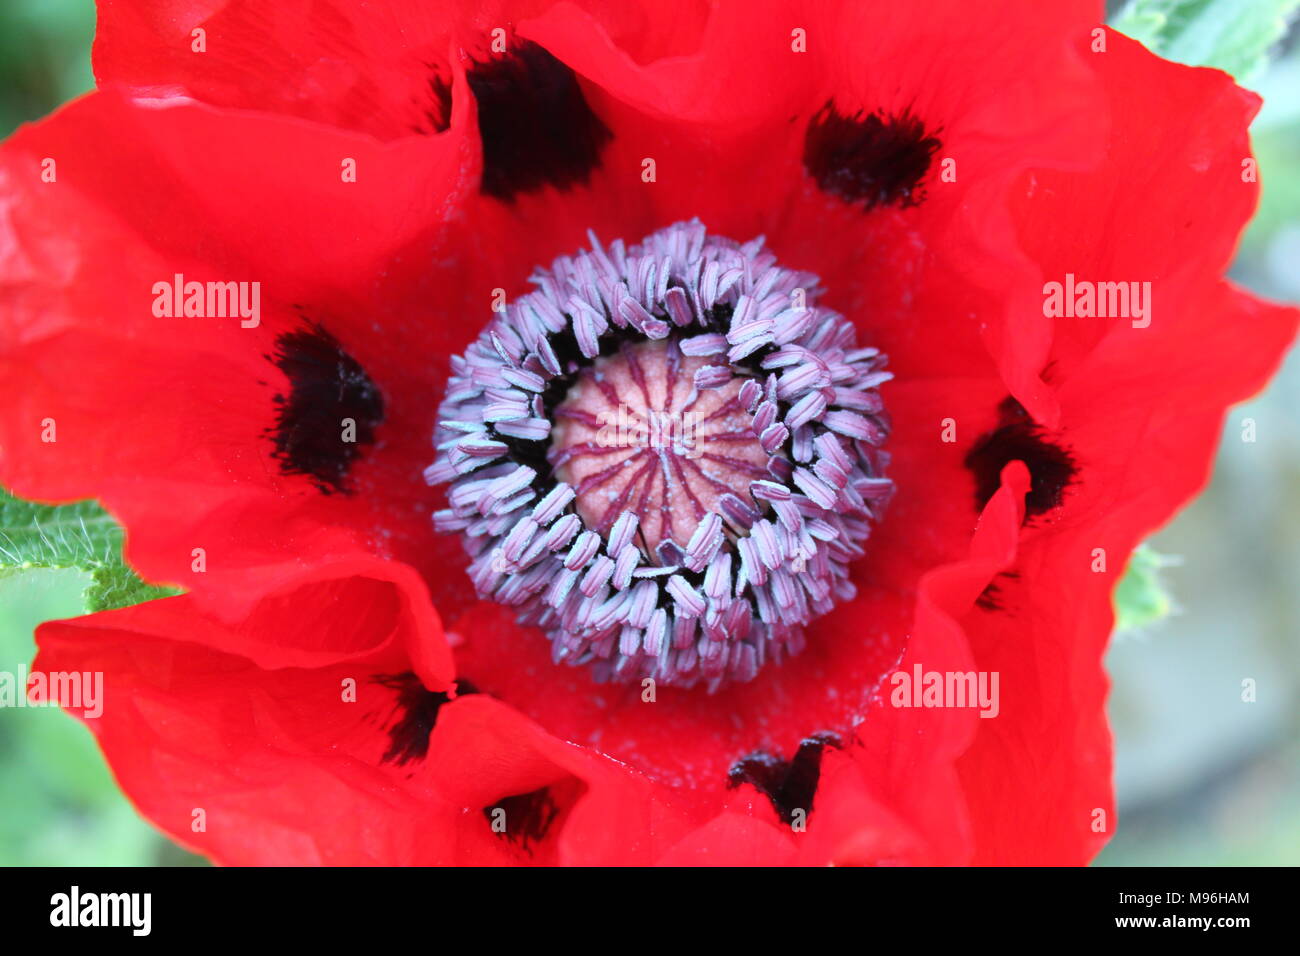 Looking down into centre of large poppy with black dots on its red petals and a round purple centre Stock Photo